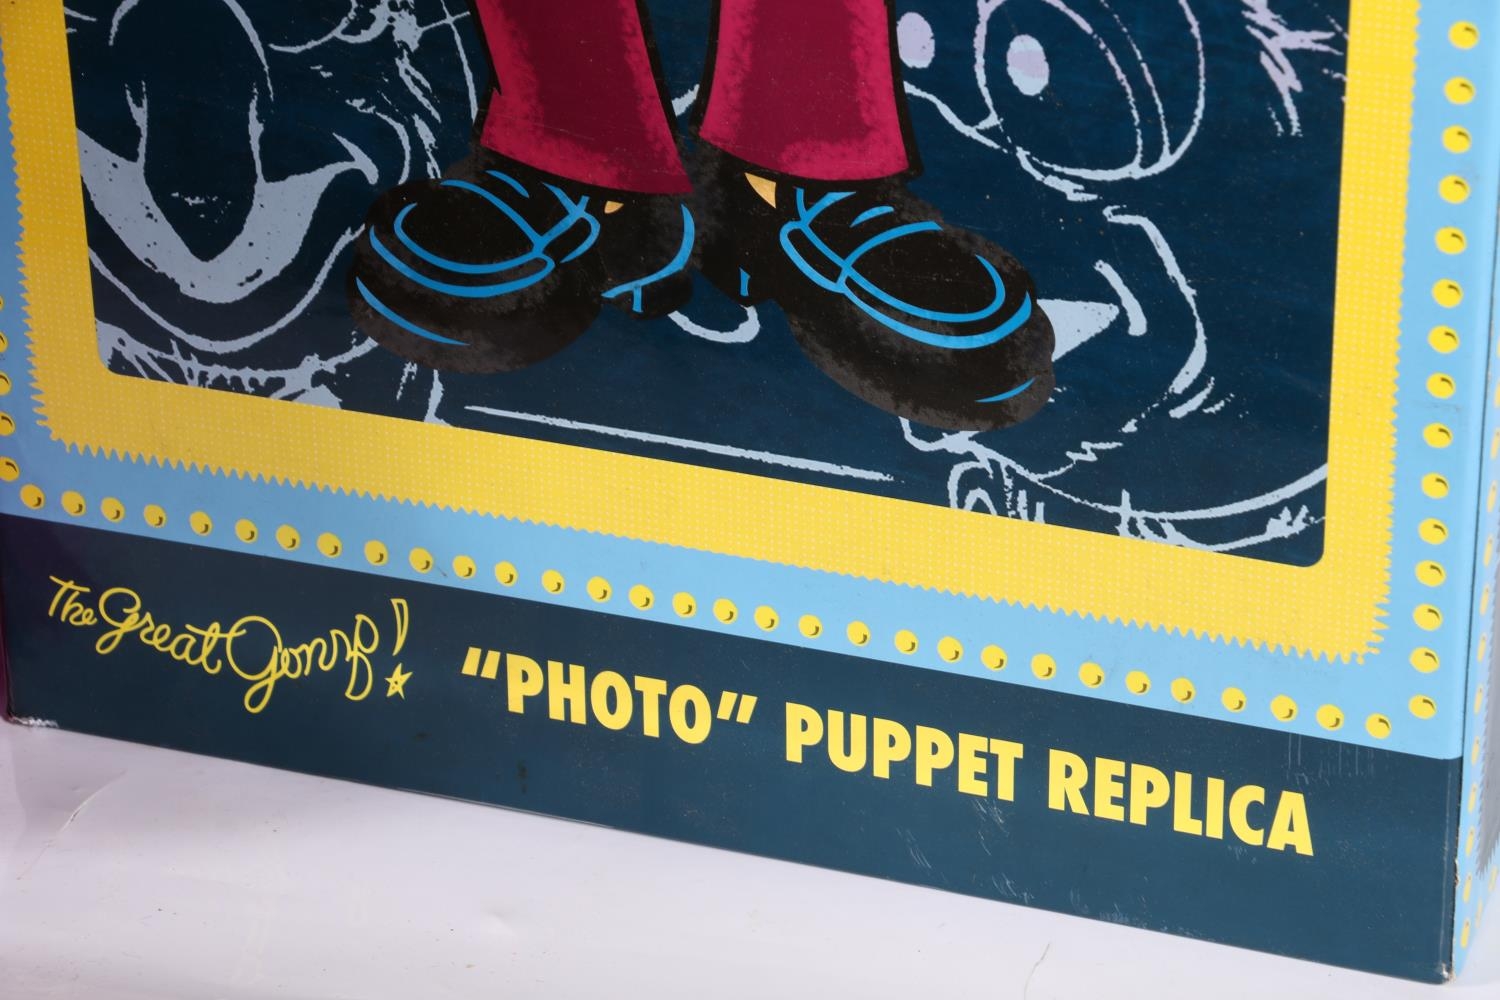 The Muppets: Photo Puppet replica, The Great Gonzo, boxed, puppet measures 63cm tall. - Image 3 of 4